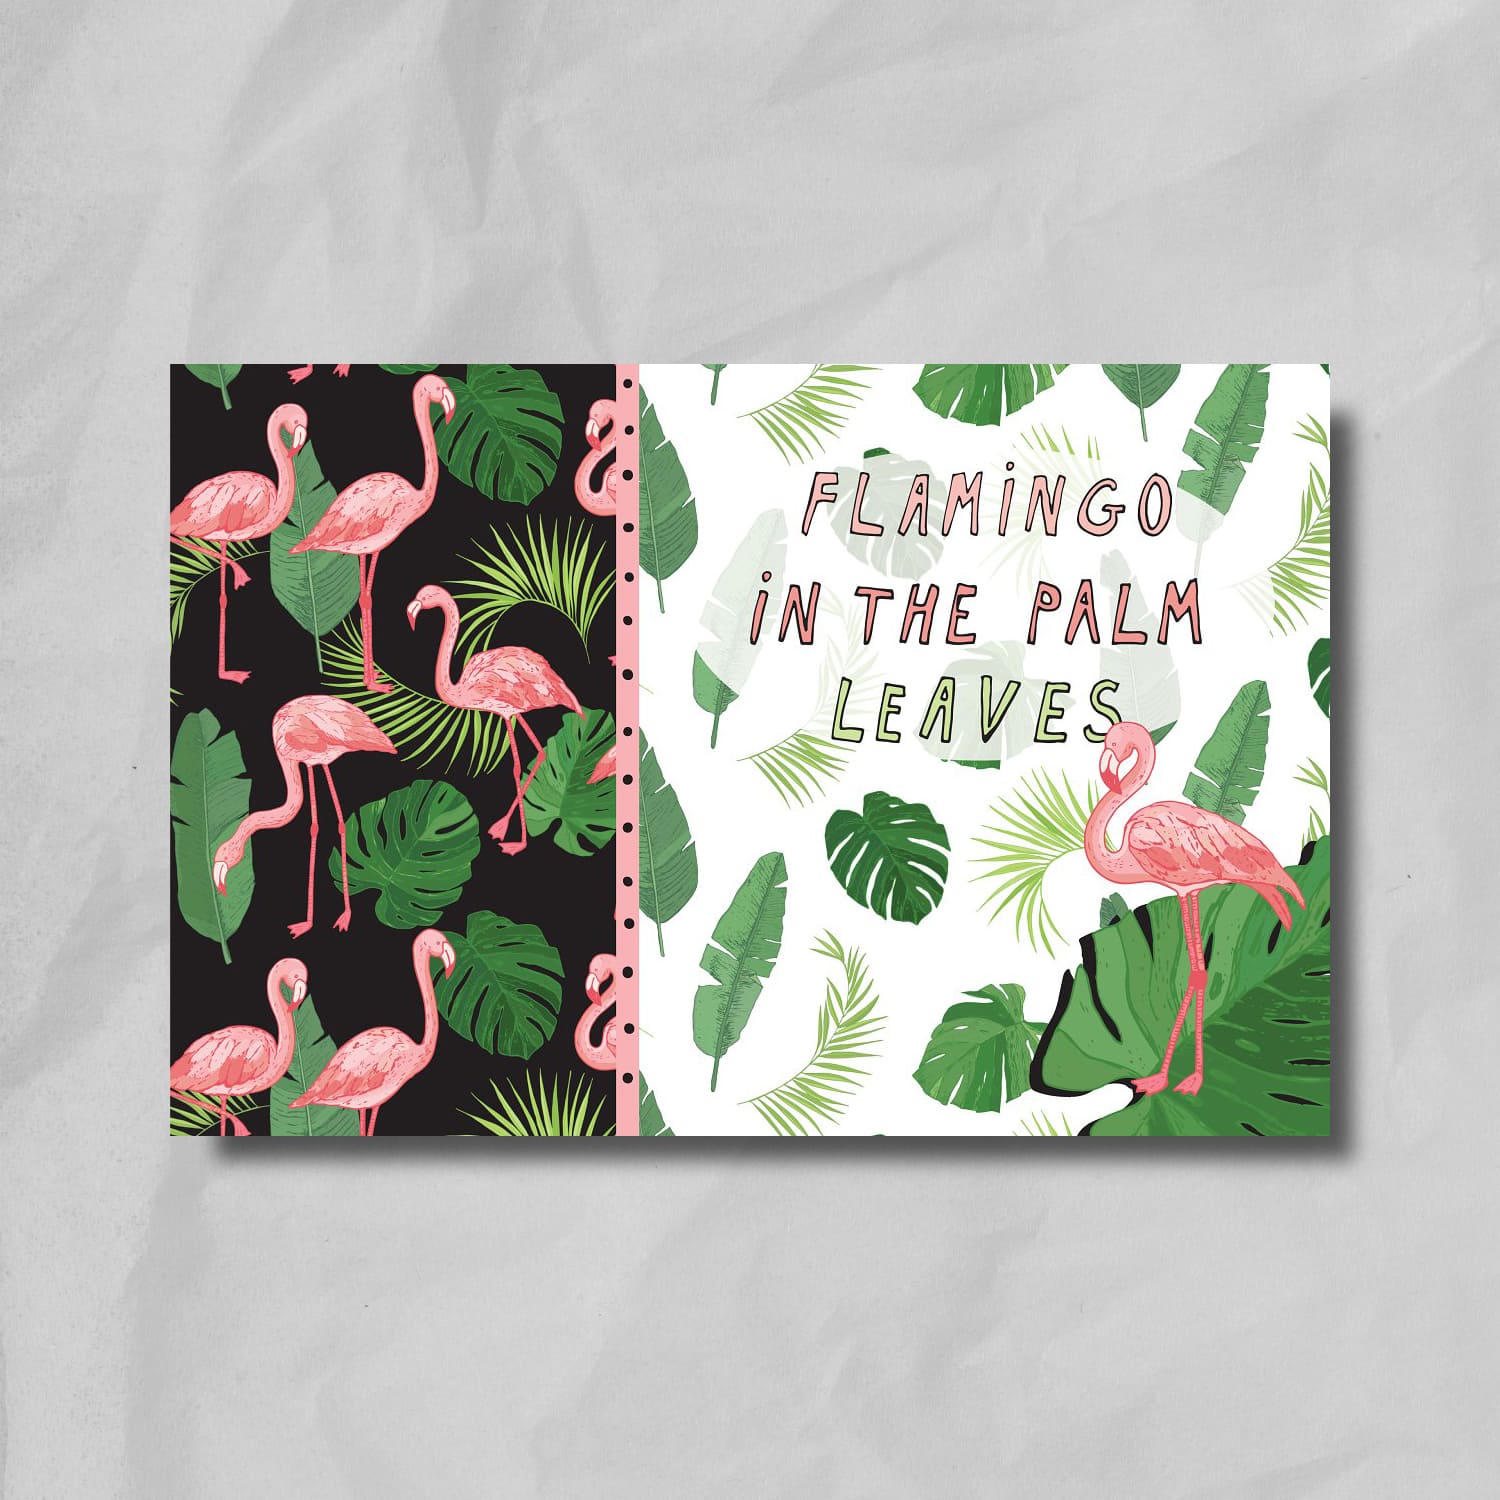 Flamingo in the palm leaves cover.